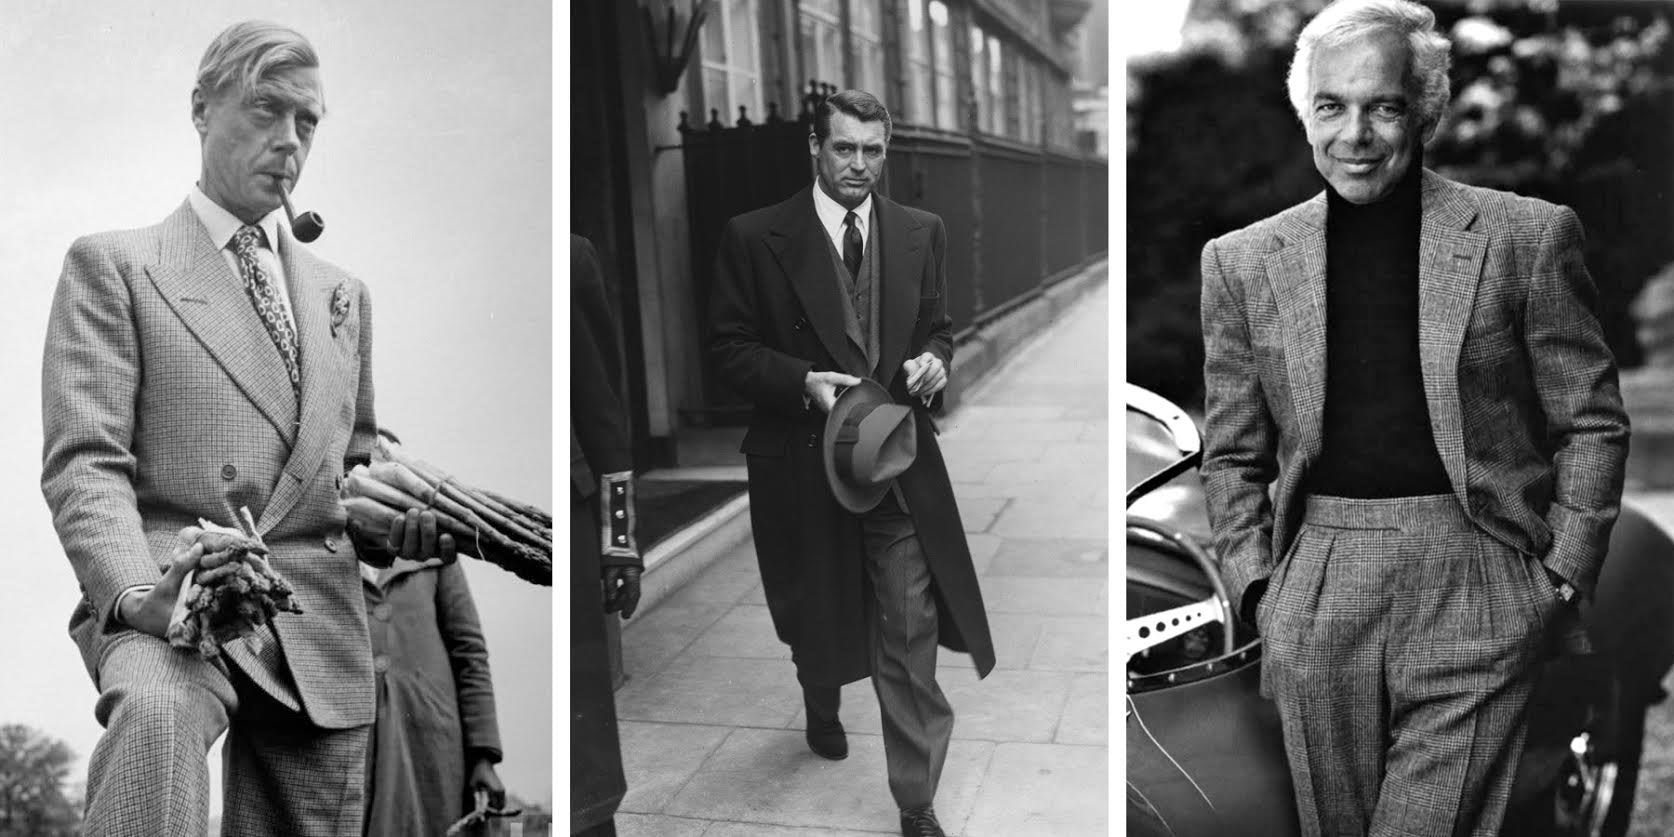 History Of Men's Fashion: What the Well Outfitted 